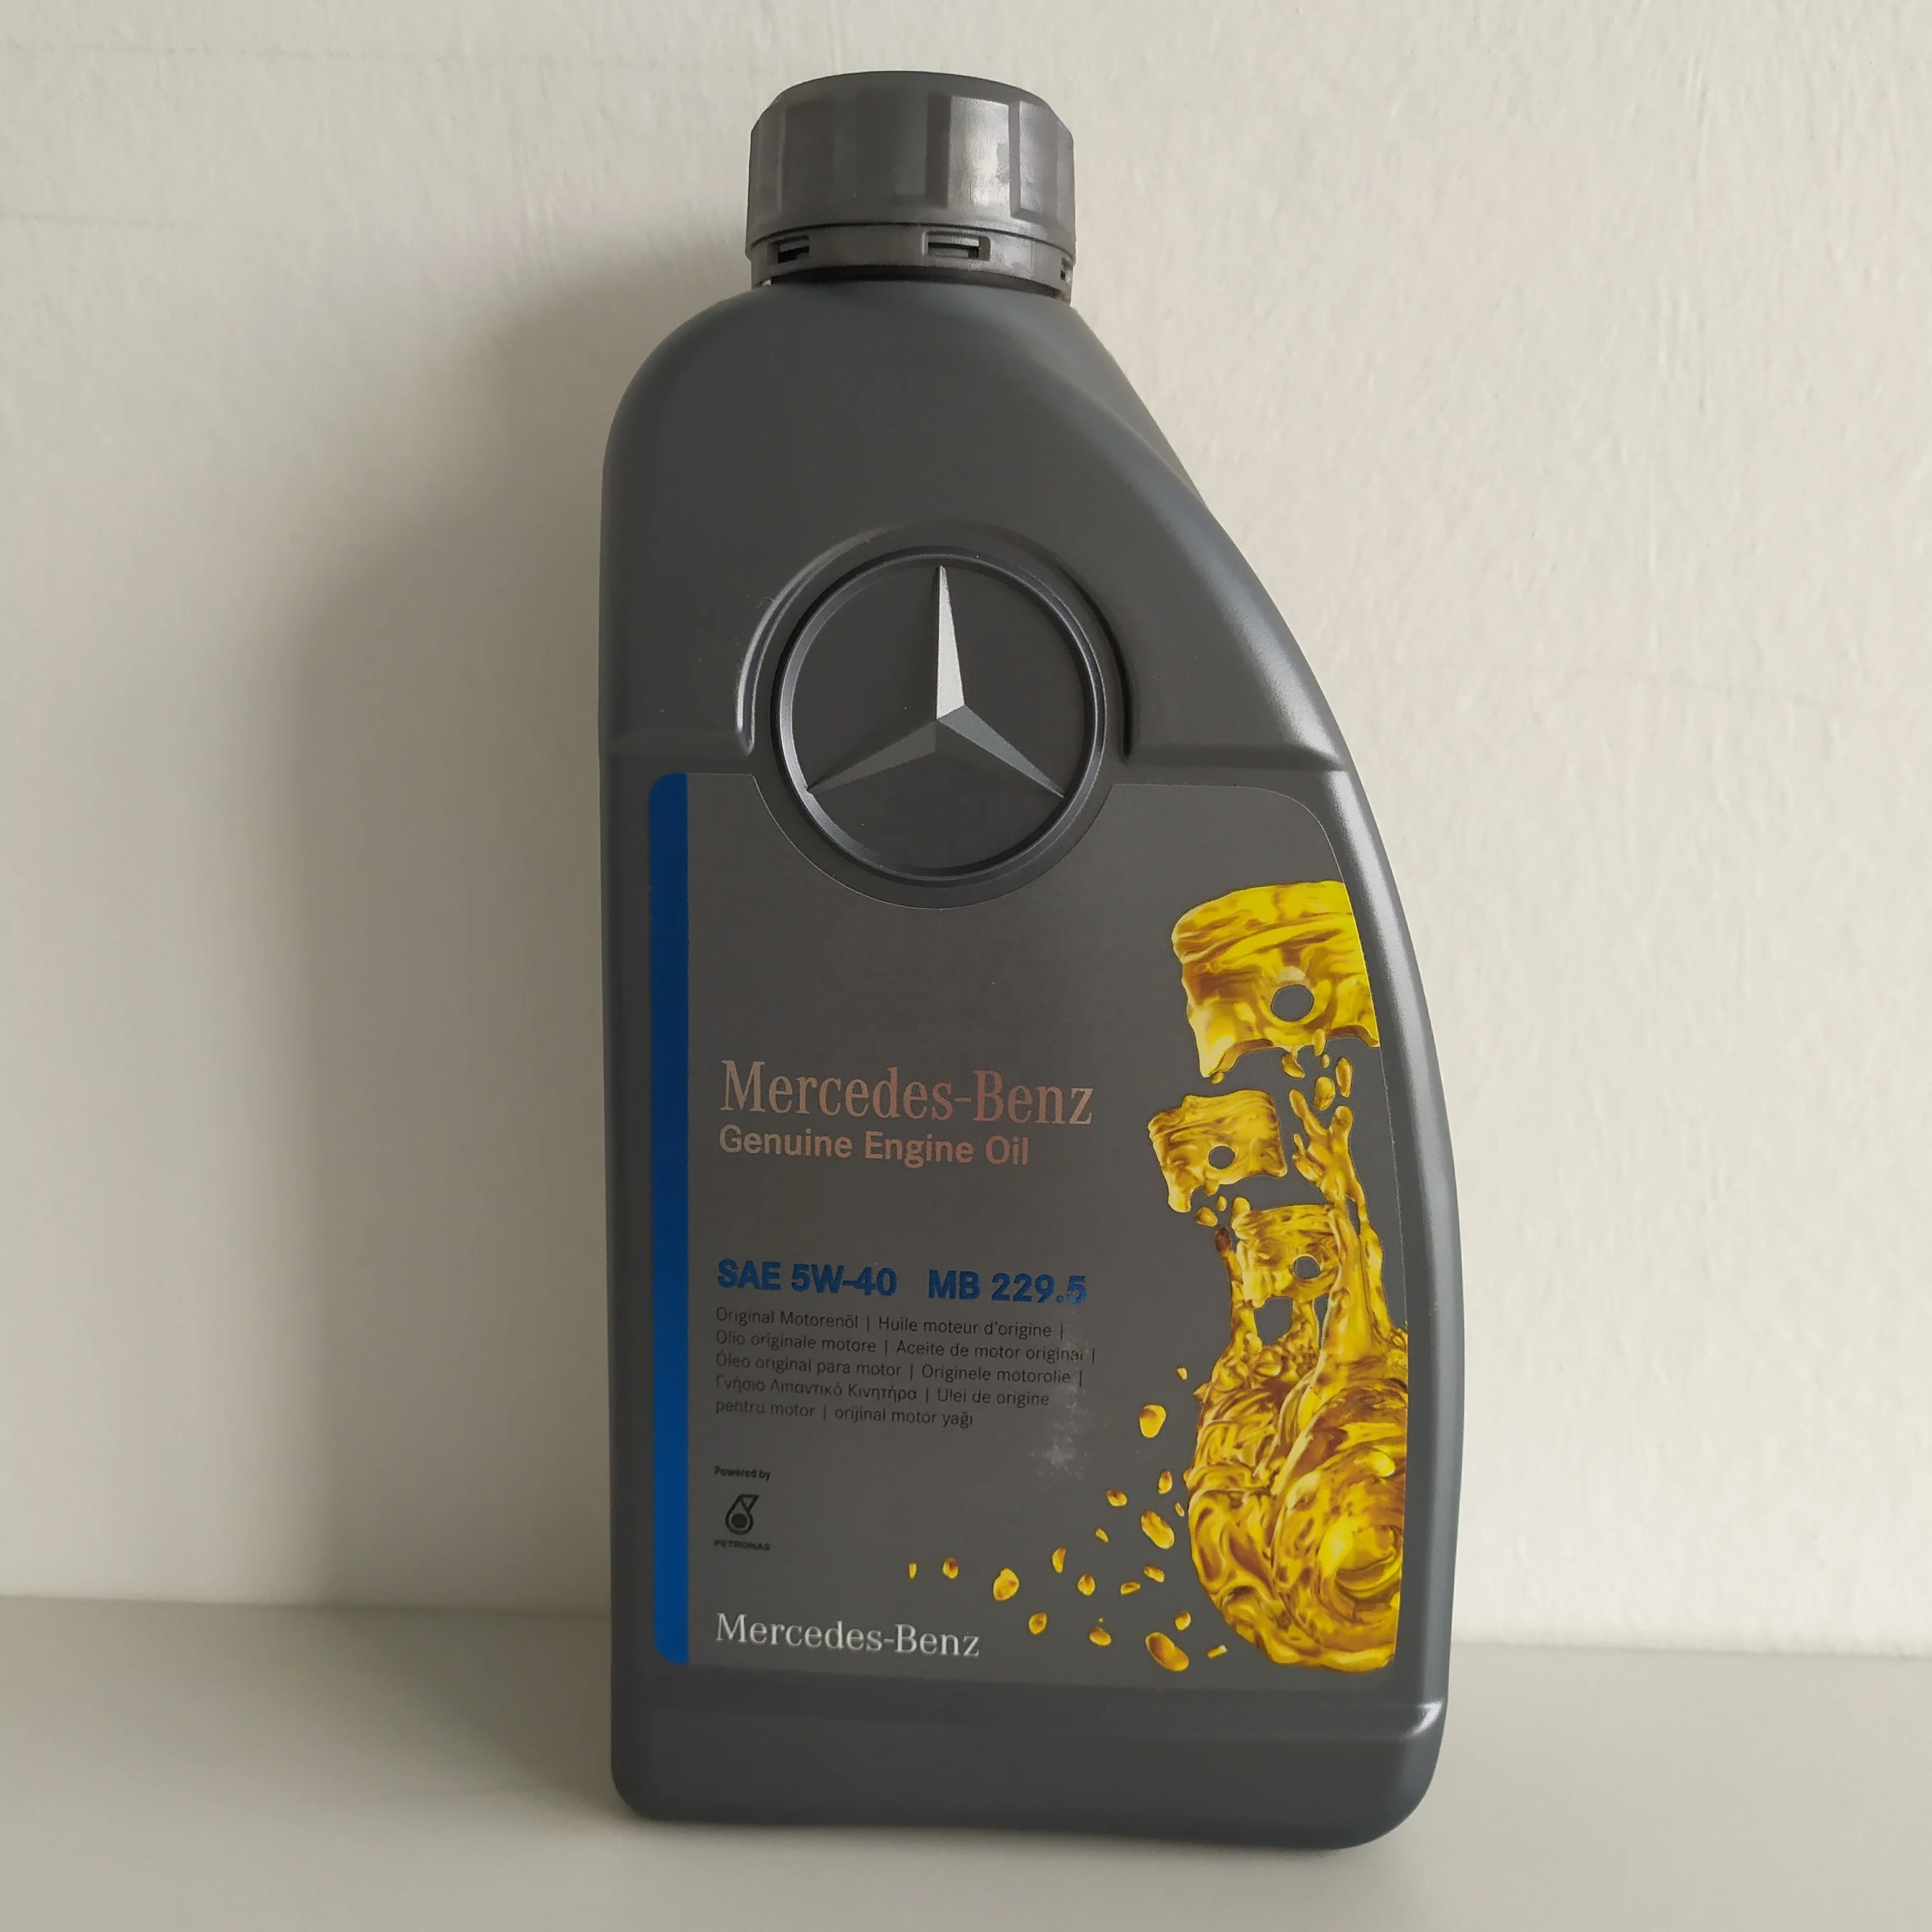 Моторное масло 229.5 5w40. MB Oil 229.5. Petronas 5w40 229.5. Genuine engine Oil MB 229.71. 229.31 Масло Mercedes-Benz.